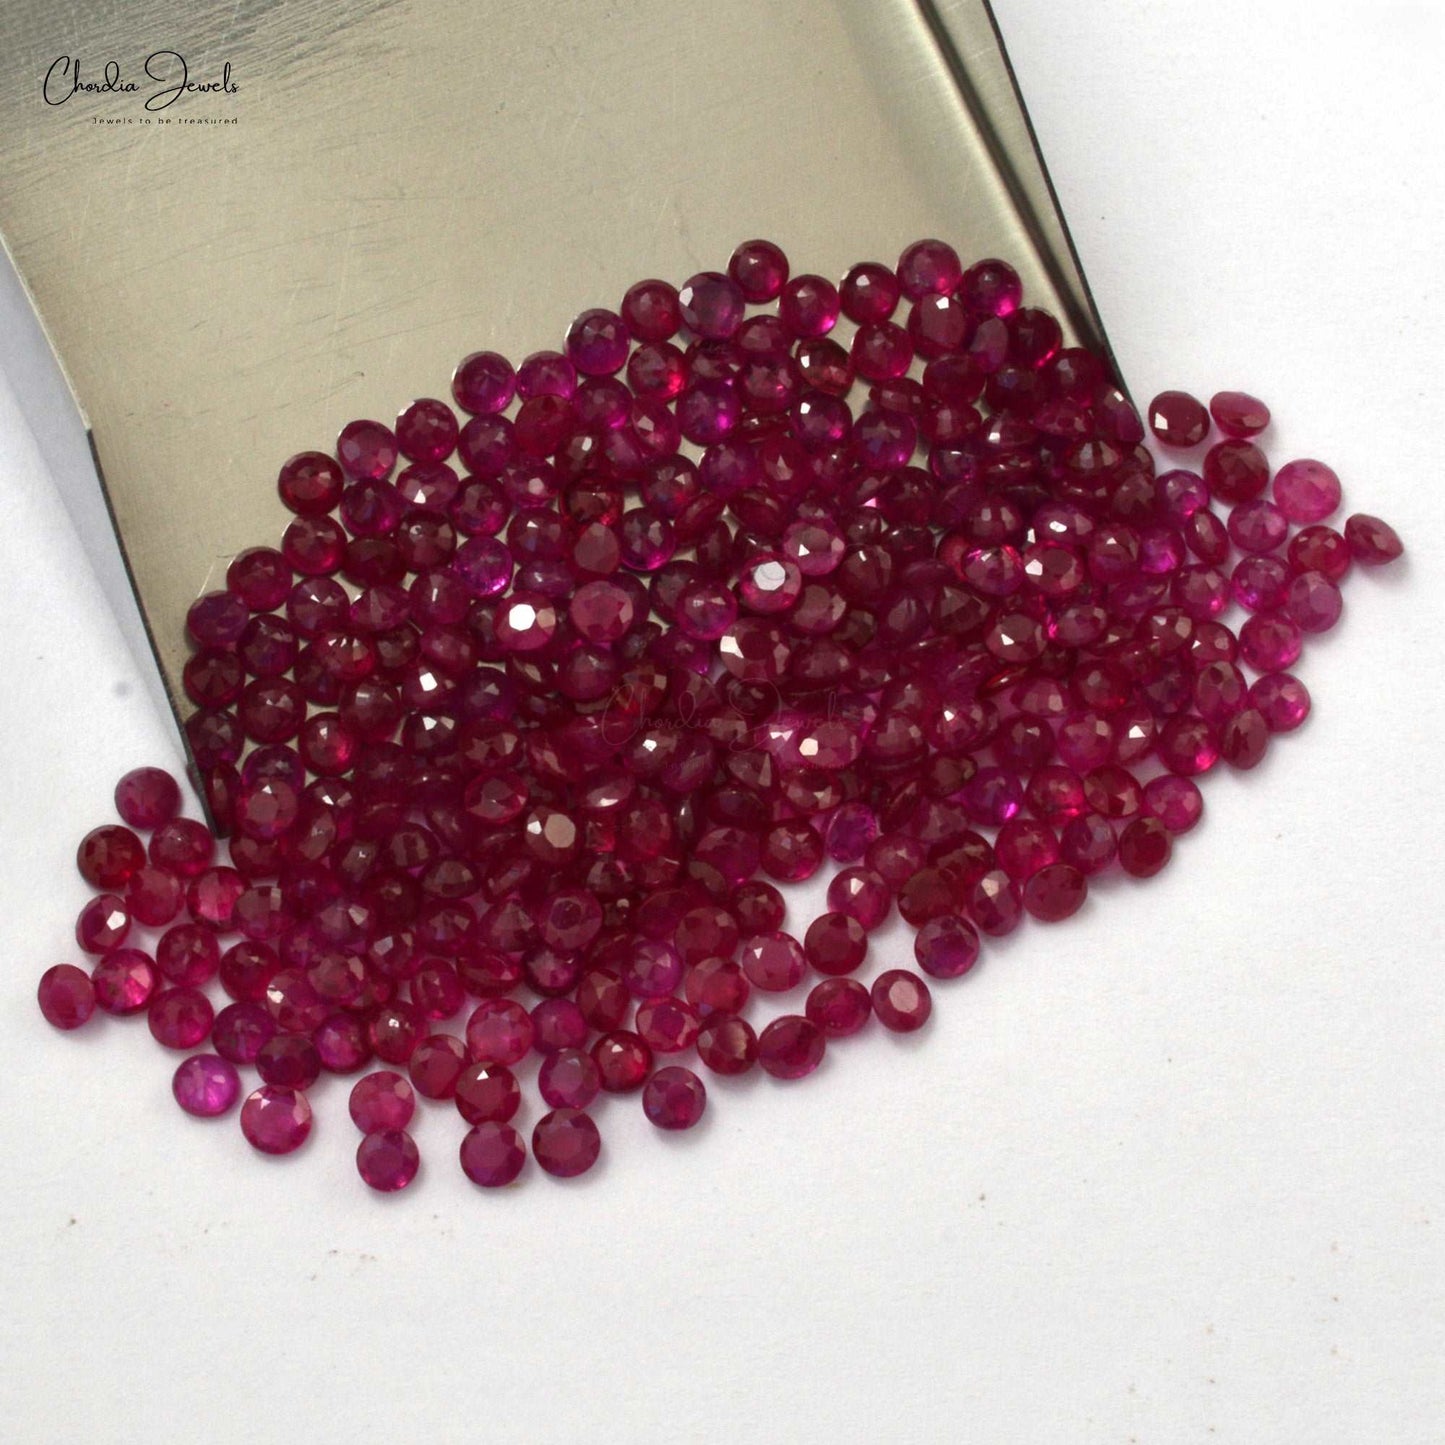 1.50 MM/1.60 MM/1.70 MM/1.80 MM/1.90 MM AAA Quality Natural Ruby Round Cut Faceted Loose Gemstone For Jewelry